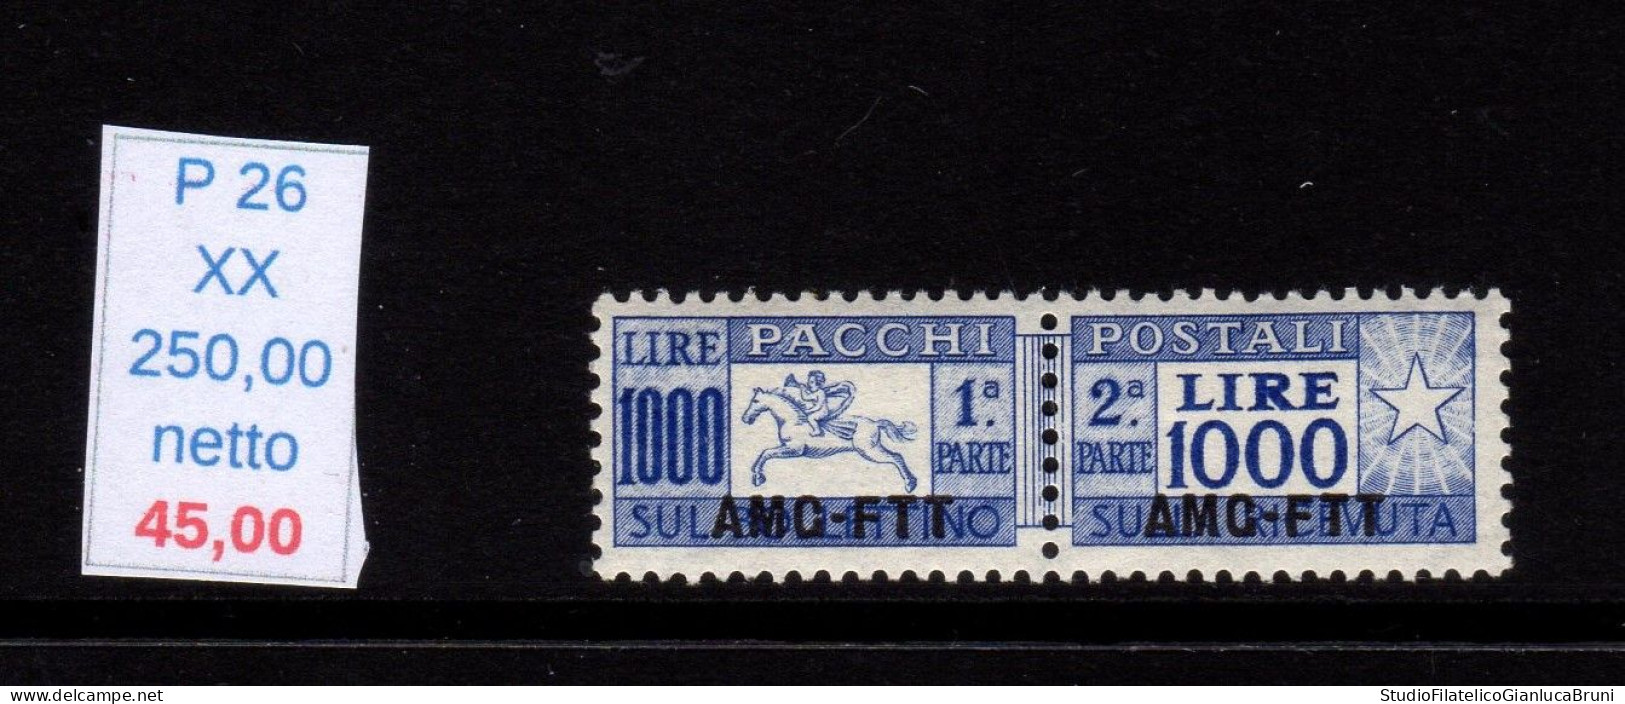 Pacchi Postali Cavallino Lire 1000 - Postal And Consigned Parcels